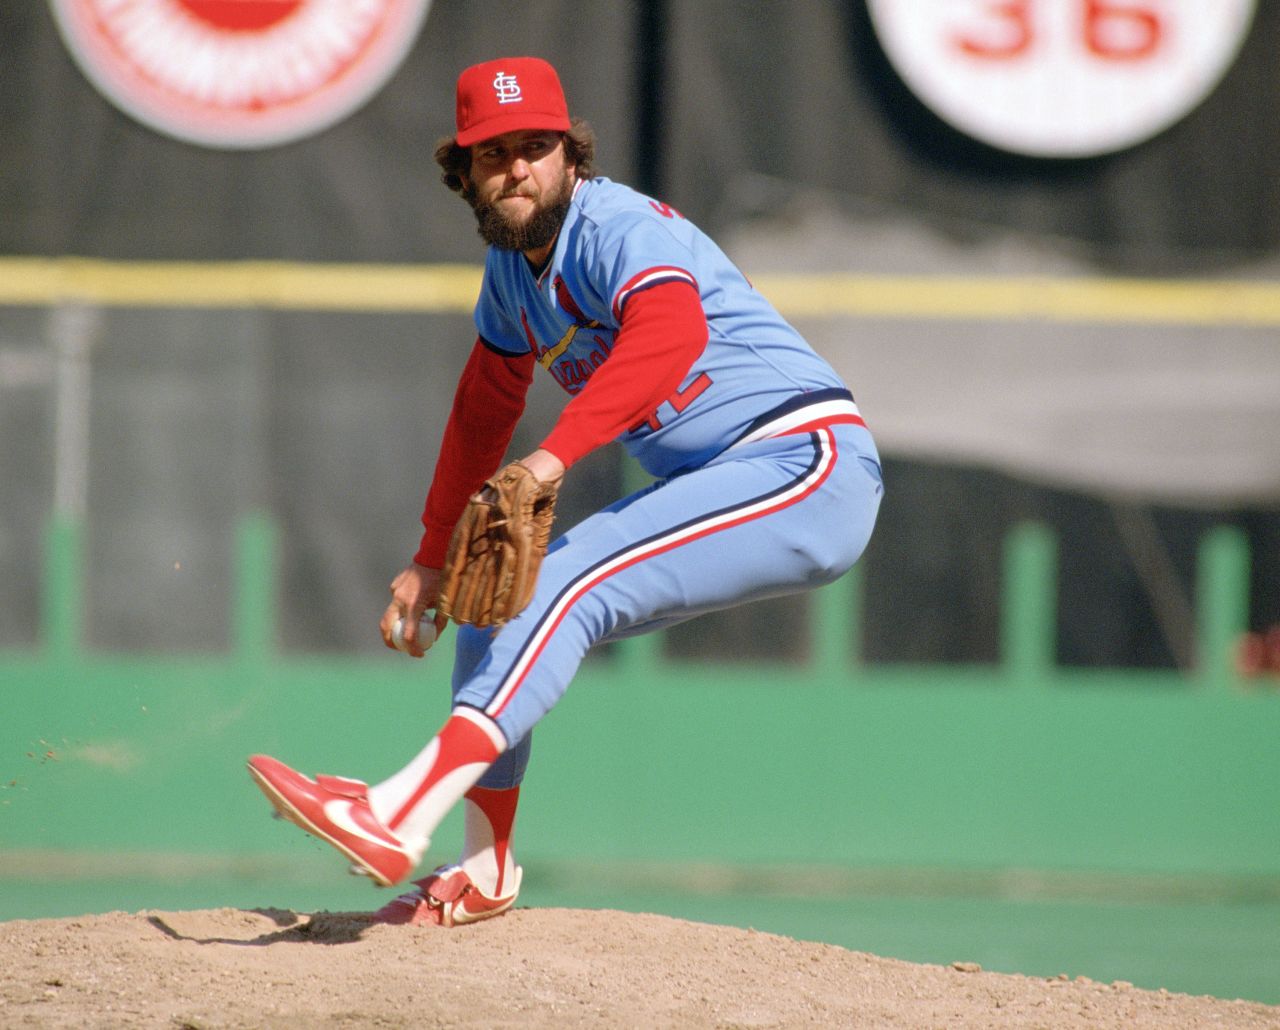 Hall of Fame baseball pitcher <a href="https://www.cnn.com/2022/10/14/sport/mlb-bruce-sutter-obit-spt" target="_blank">Bruce Sutter,</a> who saved his career while popularizing the split-finger fastball, died at the age of 69, Major League Baseball announced on October 14.